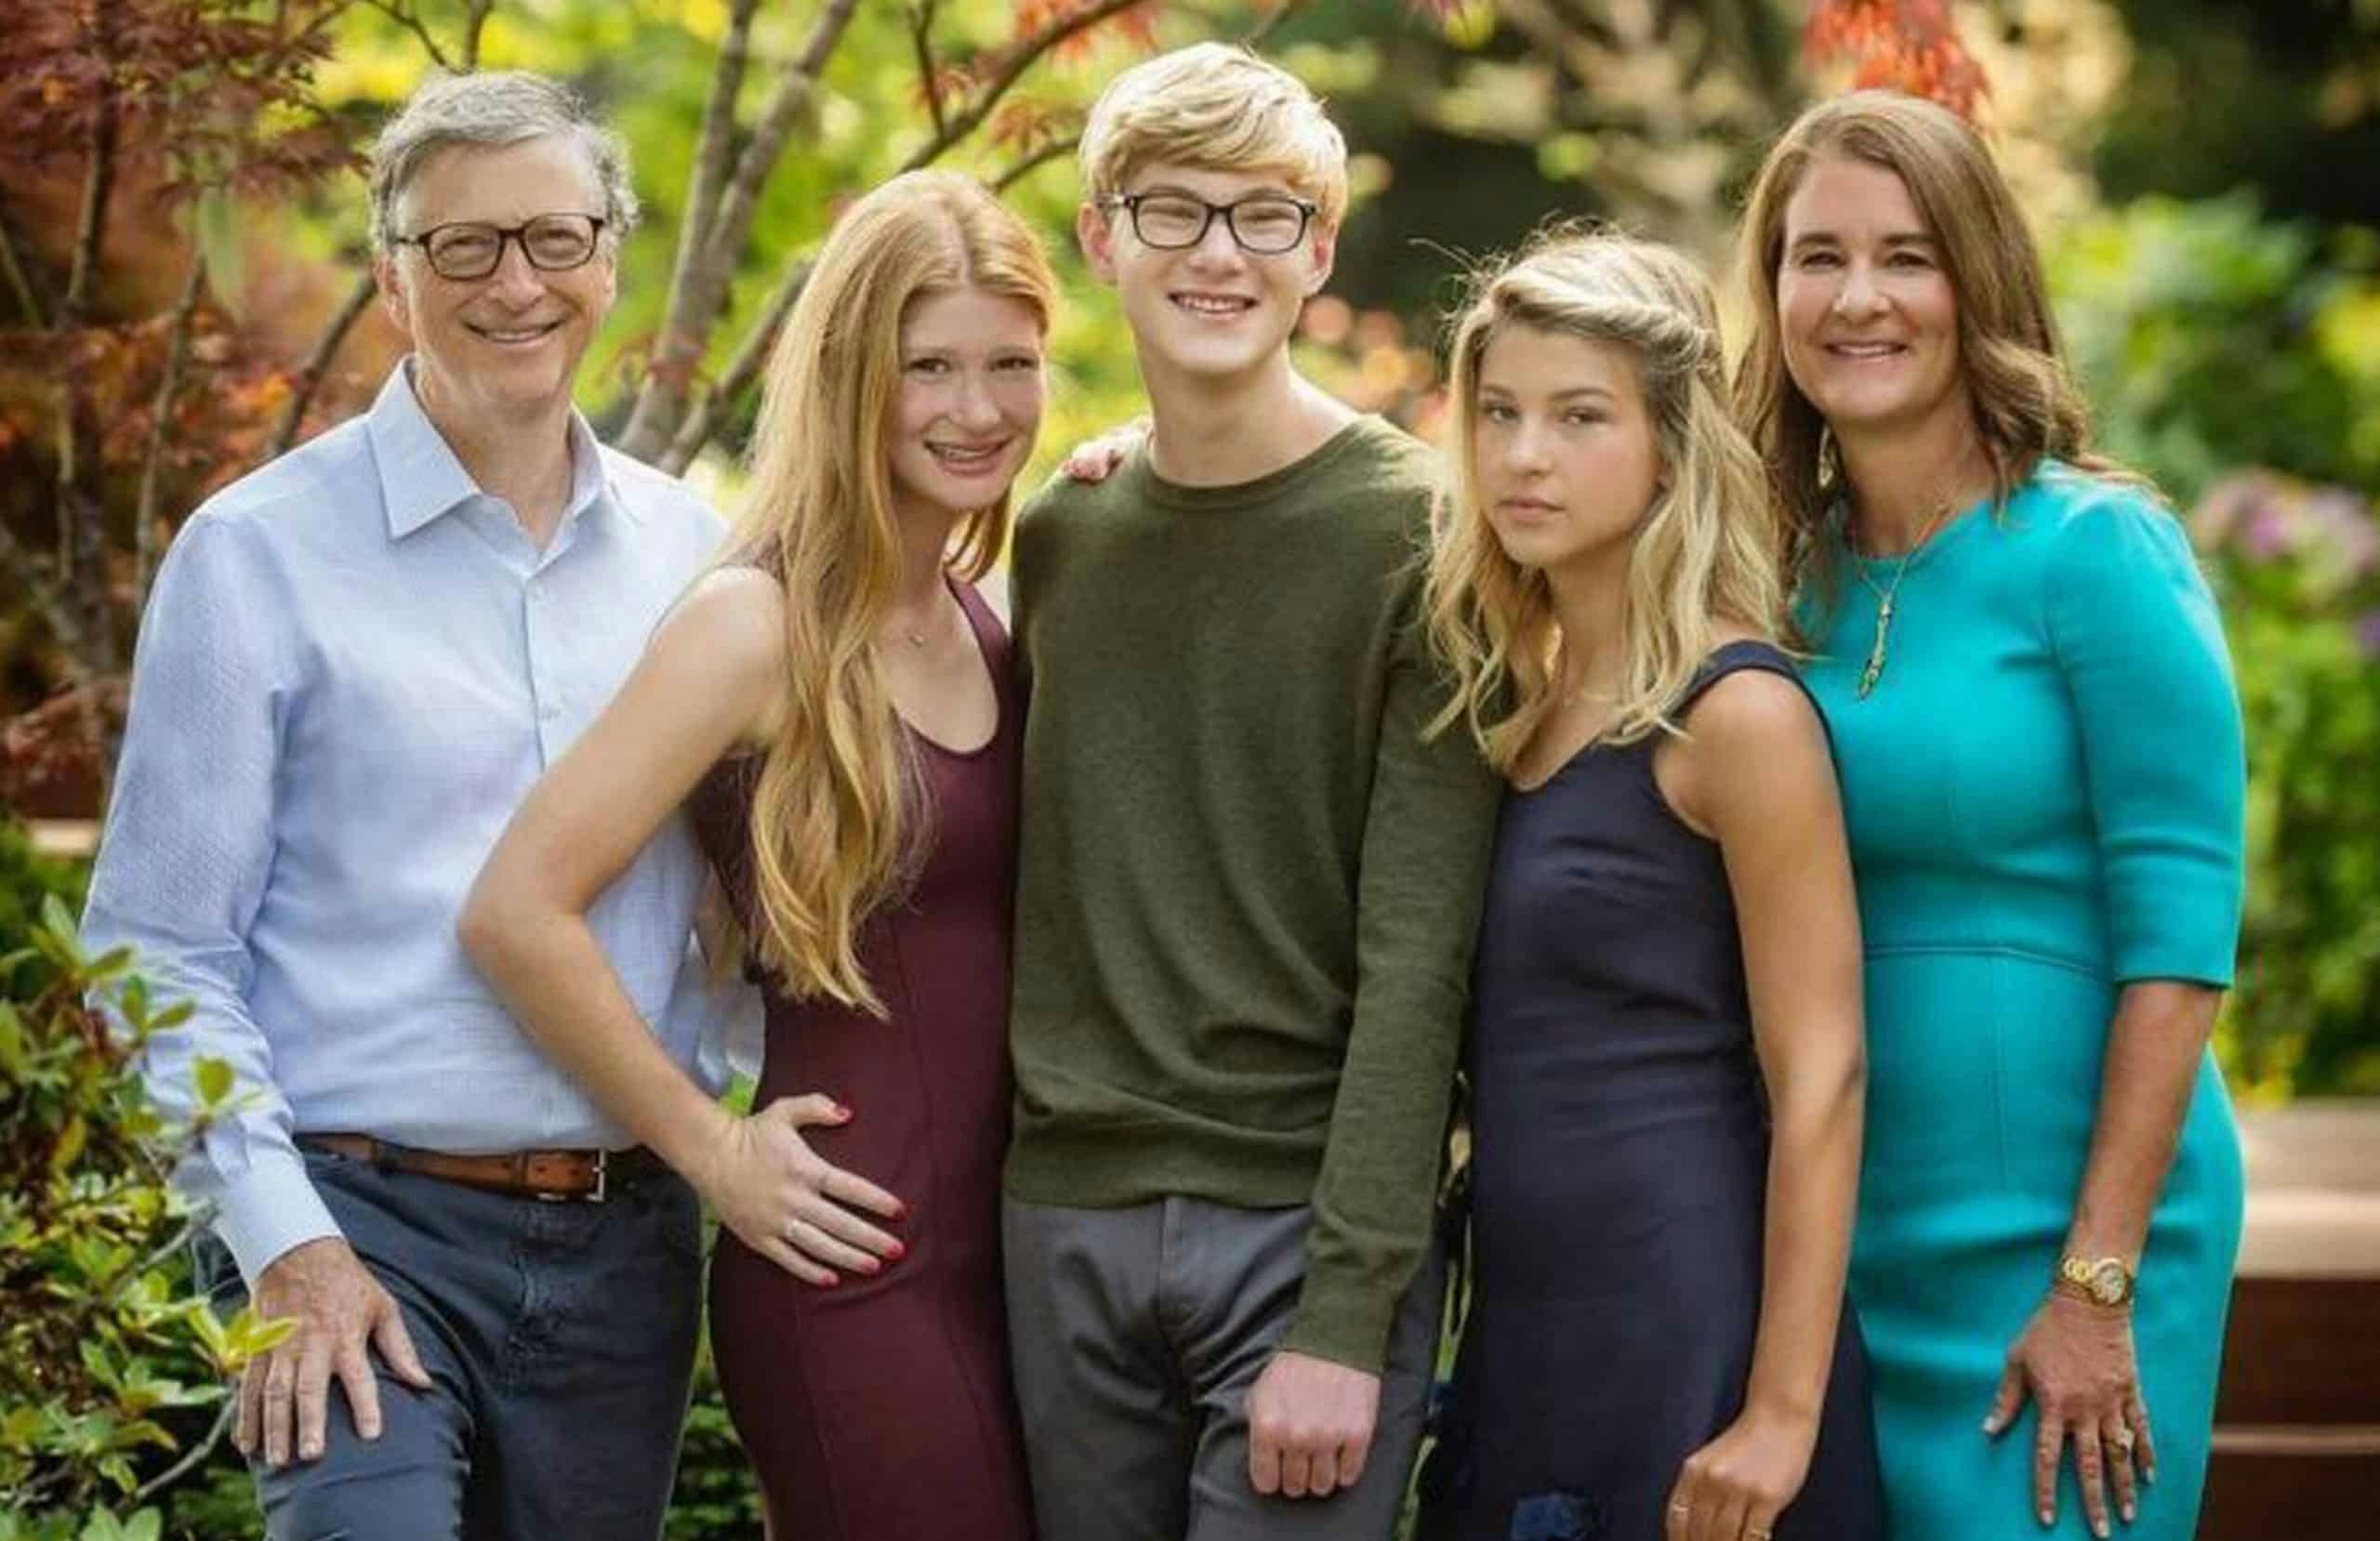 Who Are The Heirs To Microsoft? Meet The Children Of Bill & Melinda Gates